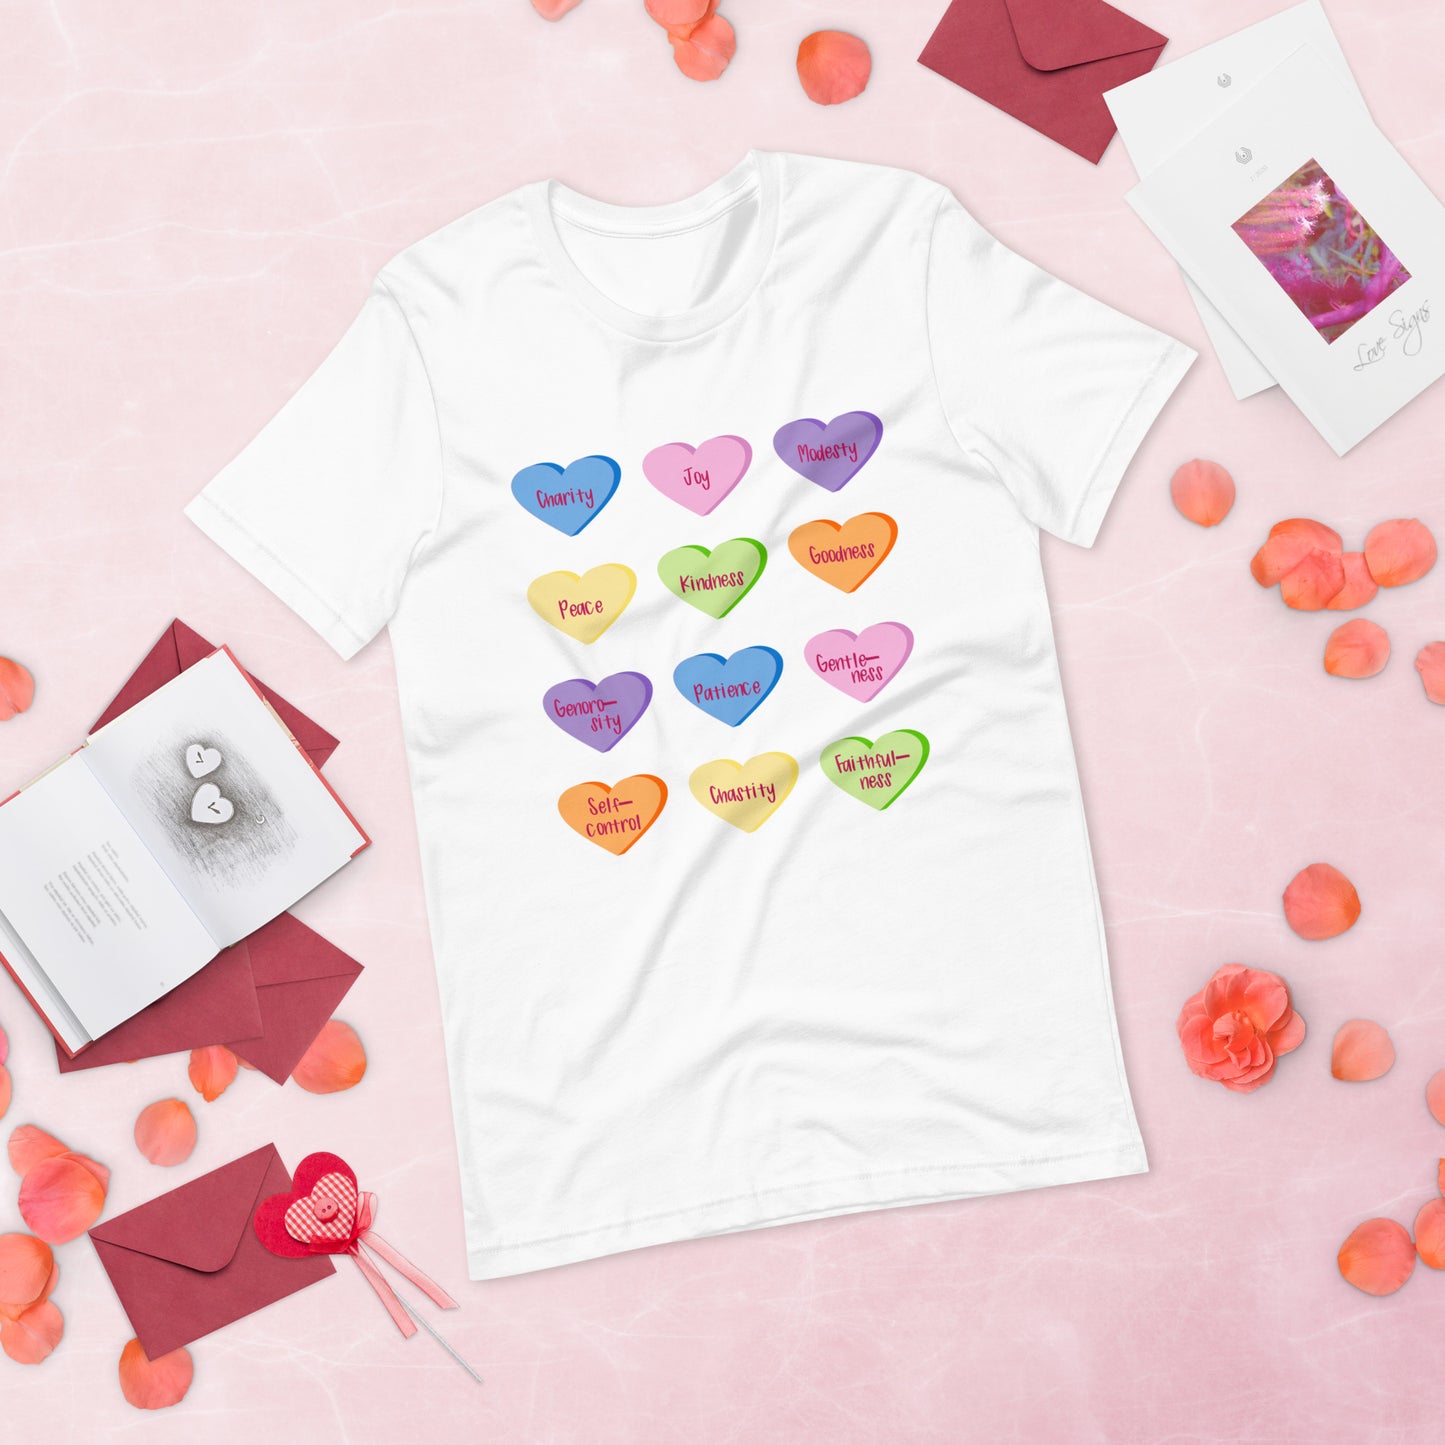 Fruit of the Holy Spirit Candy Hearts T-shirt in white